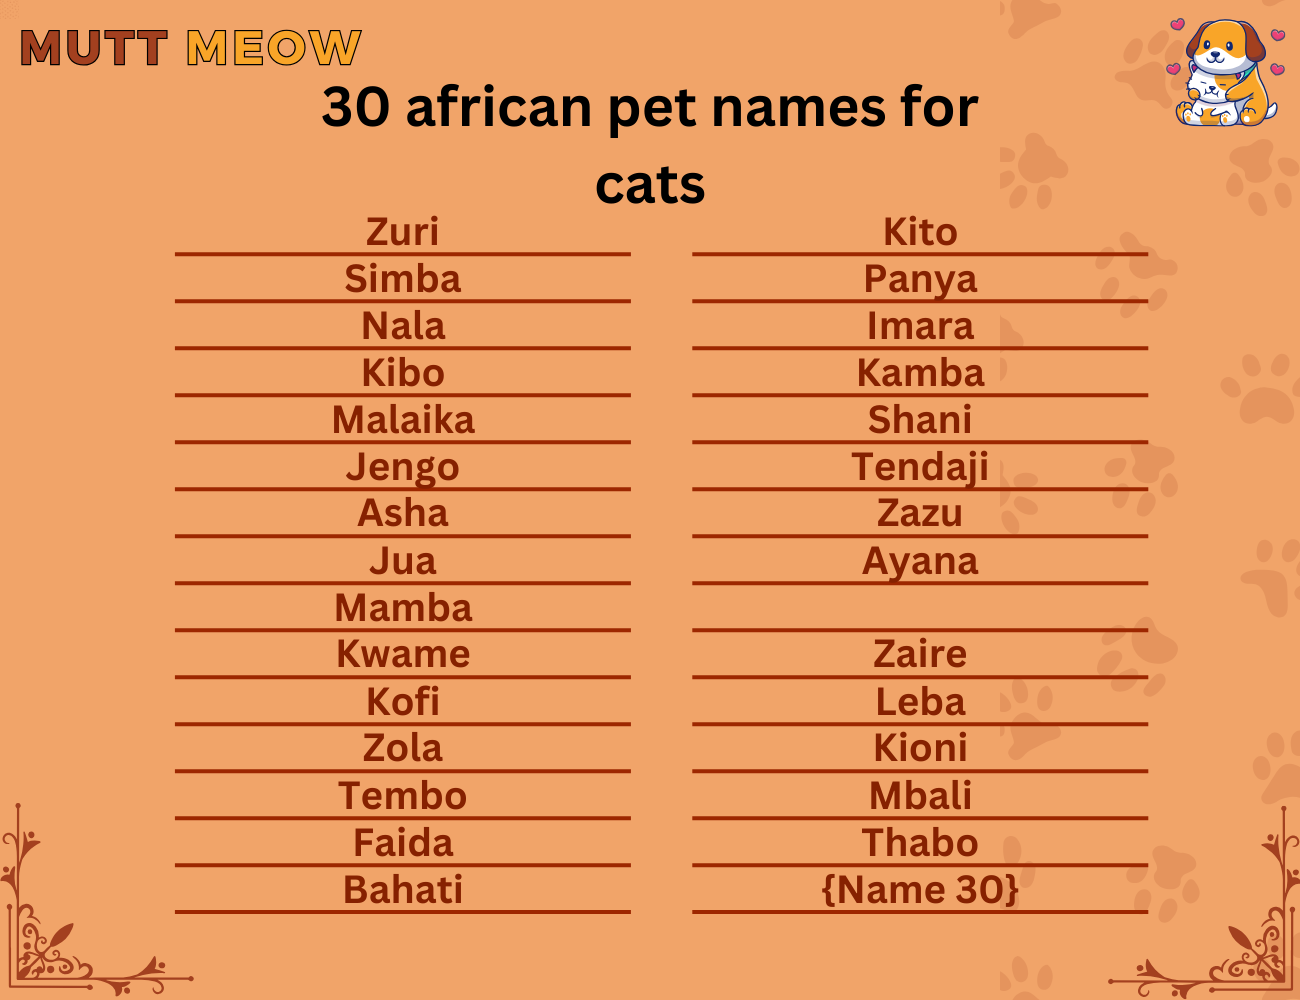 30 african pet names for cats